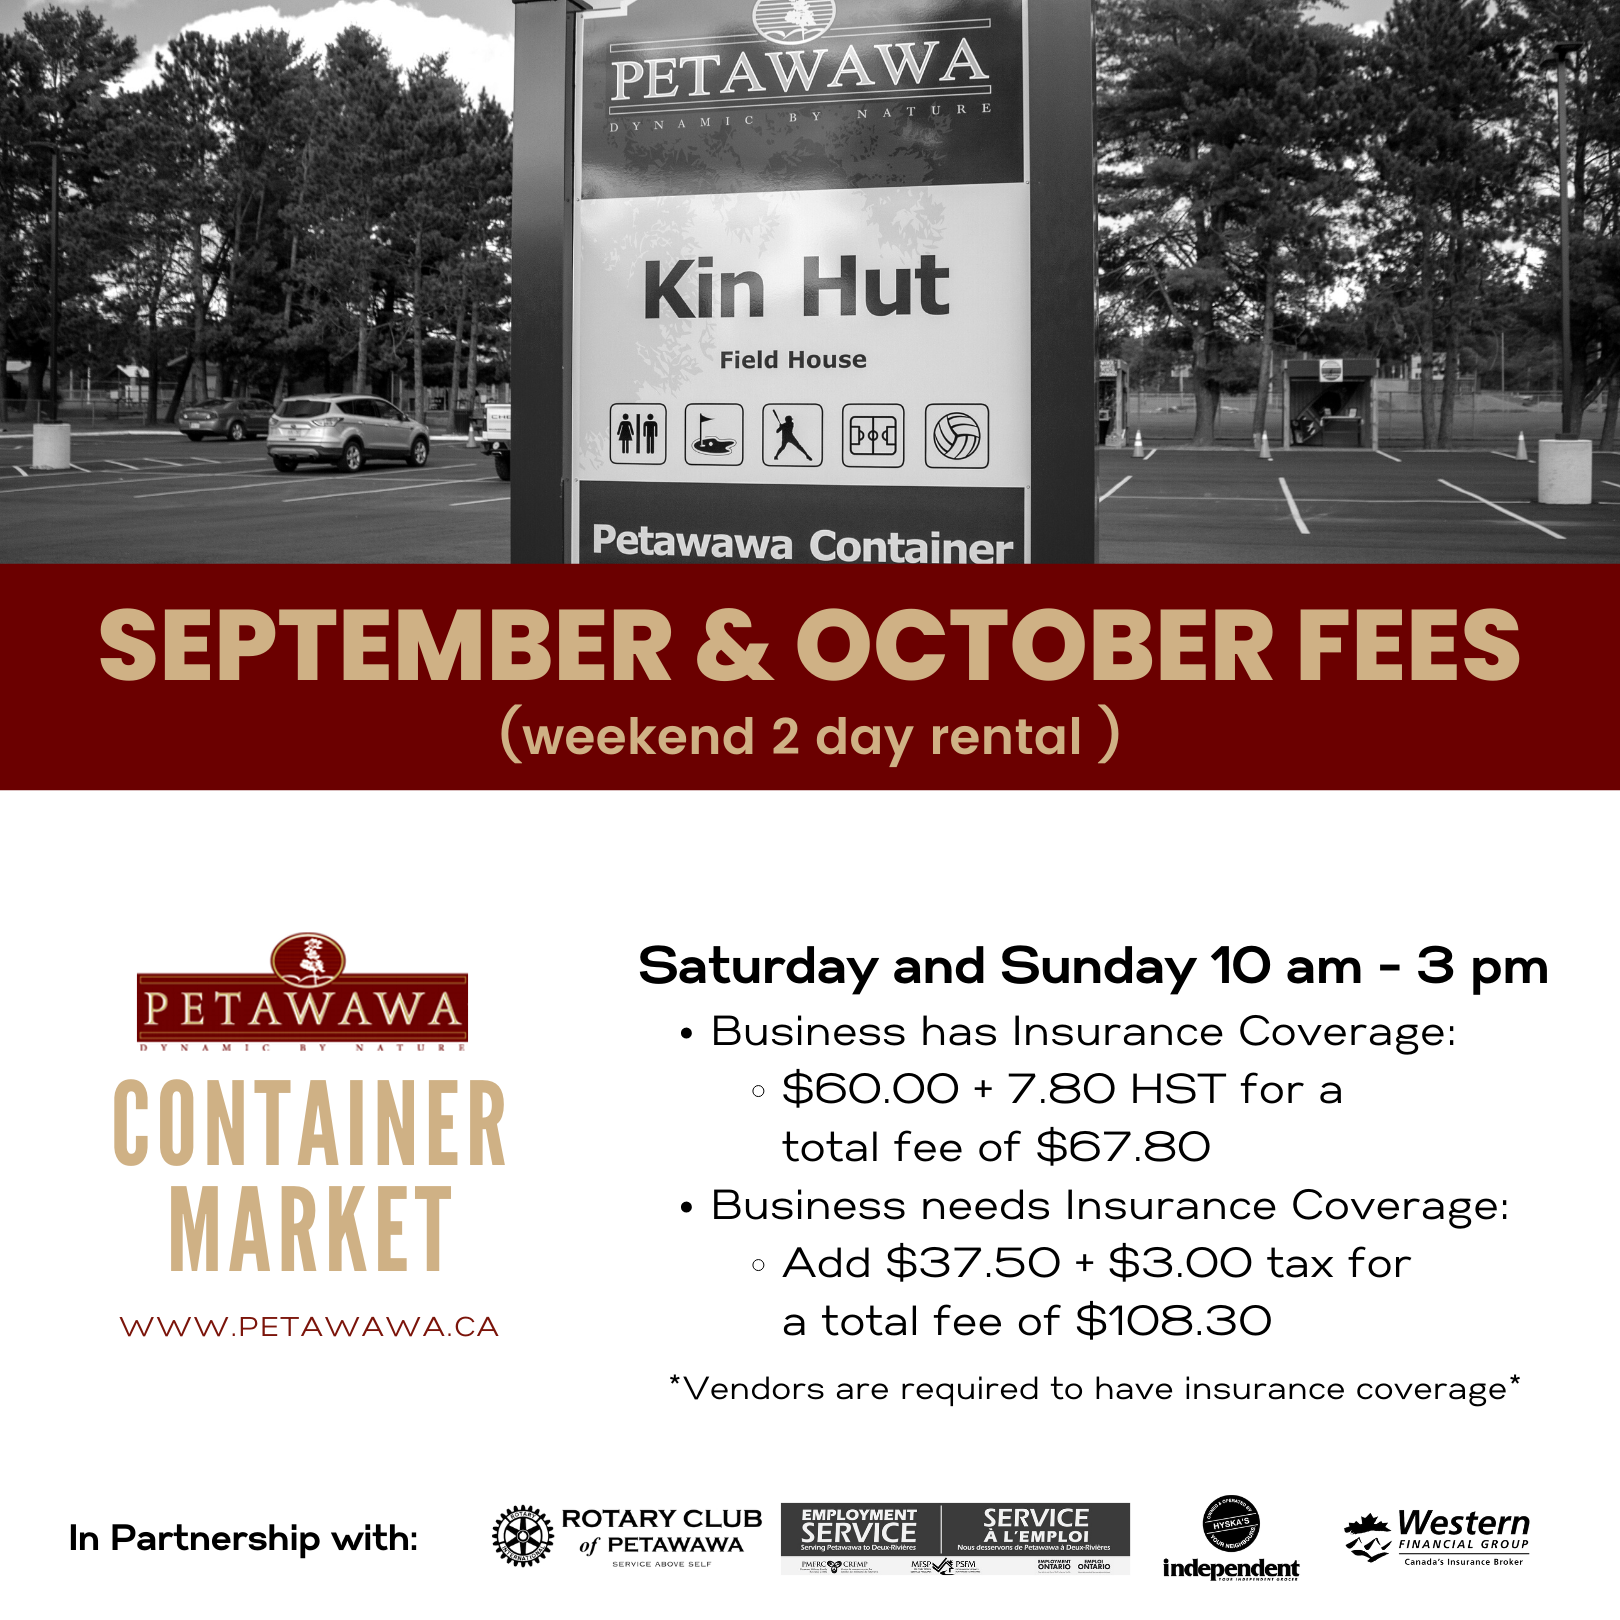 A poster of the September and October rental program fees